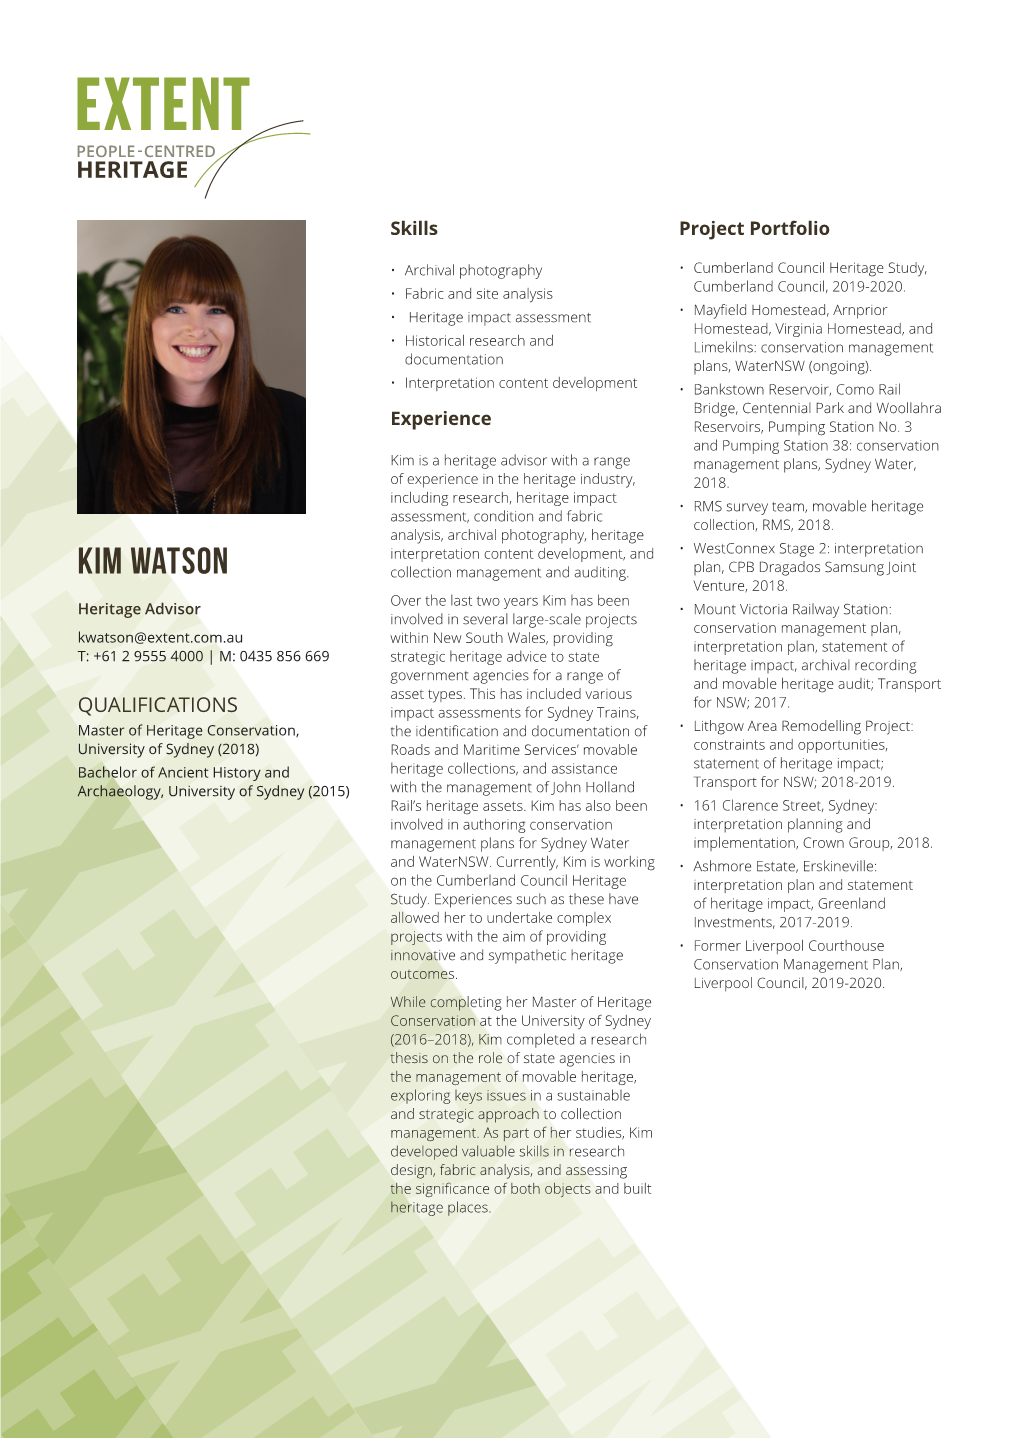 KIM WATSON Collection Management and Auditing